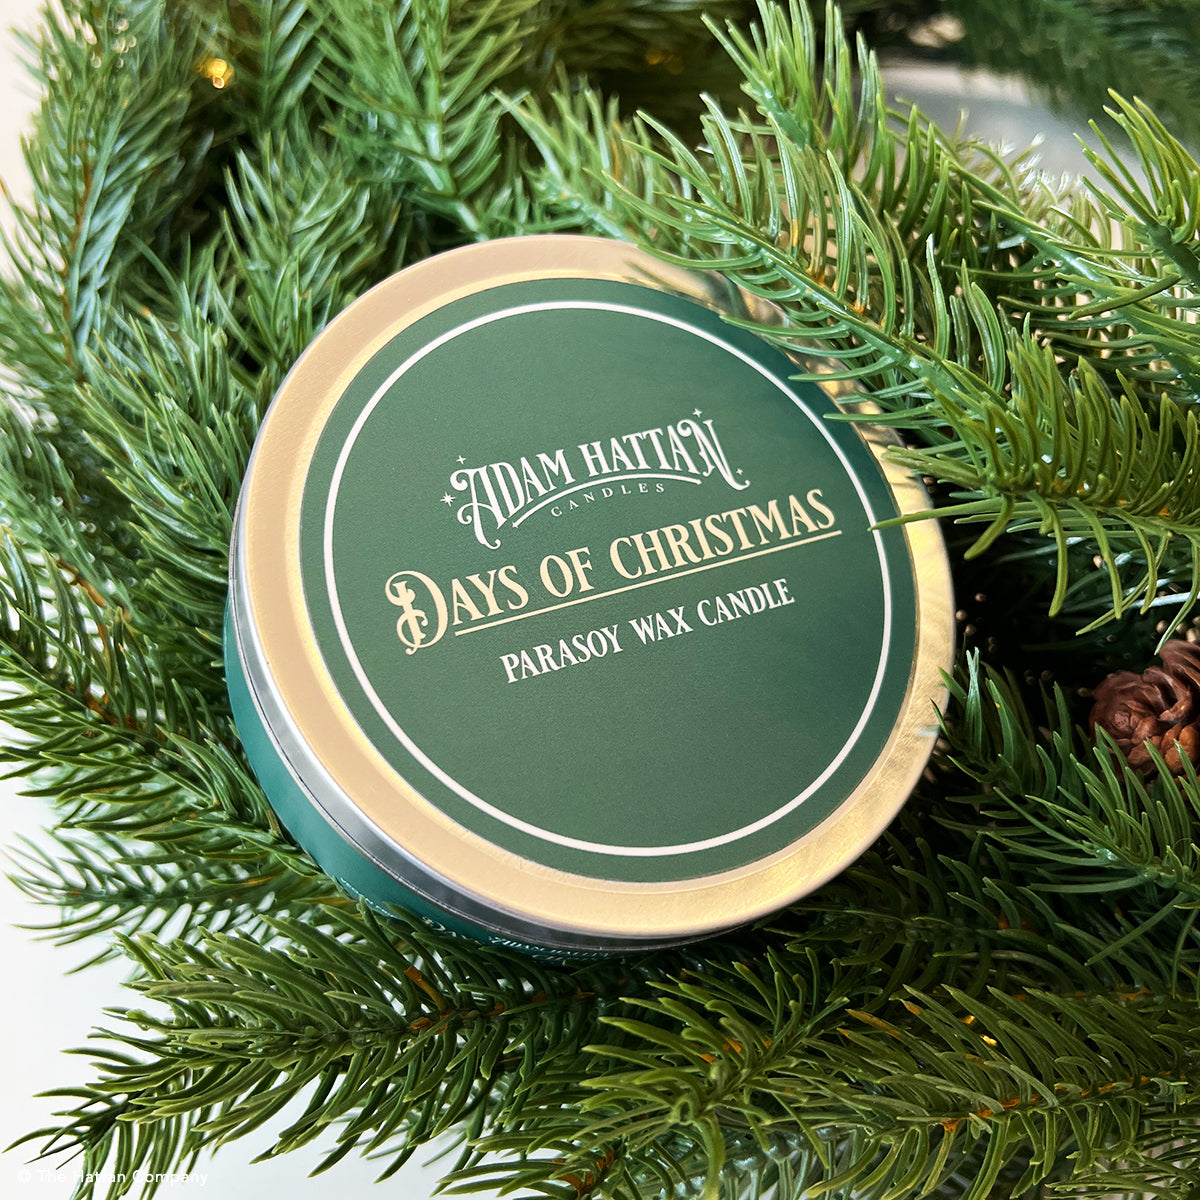 Days of Christmas Candle | LIMITED RELEASE